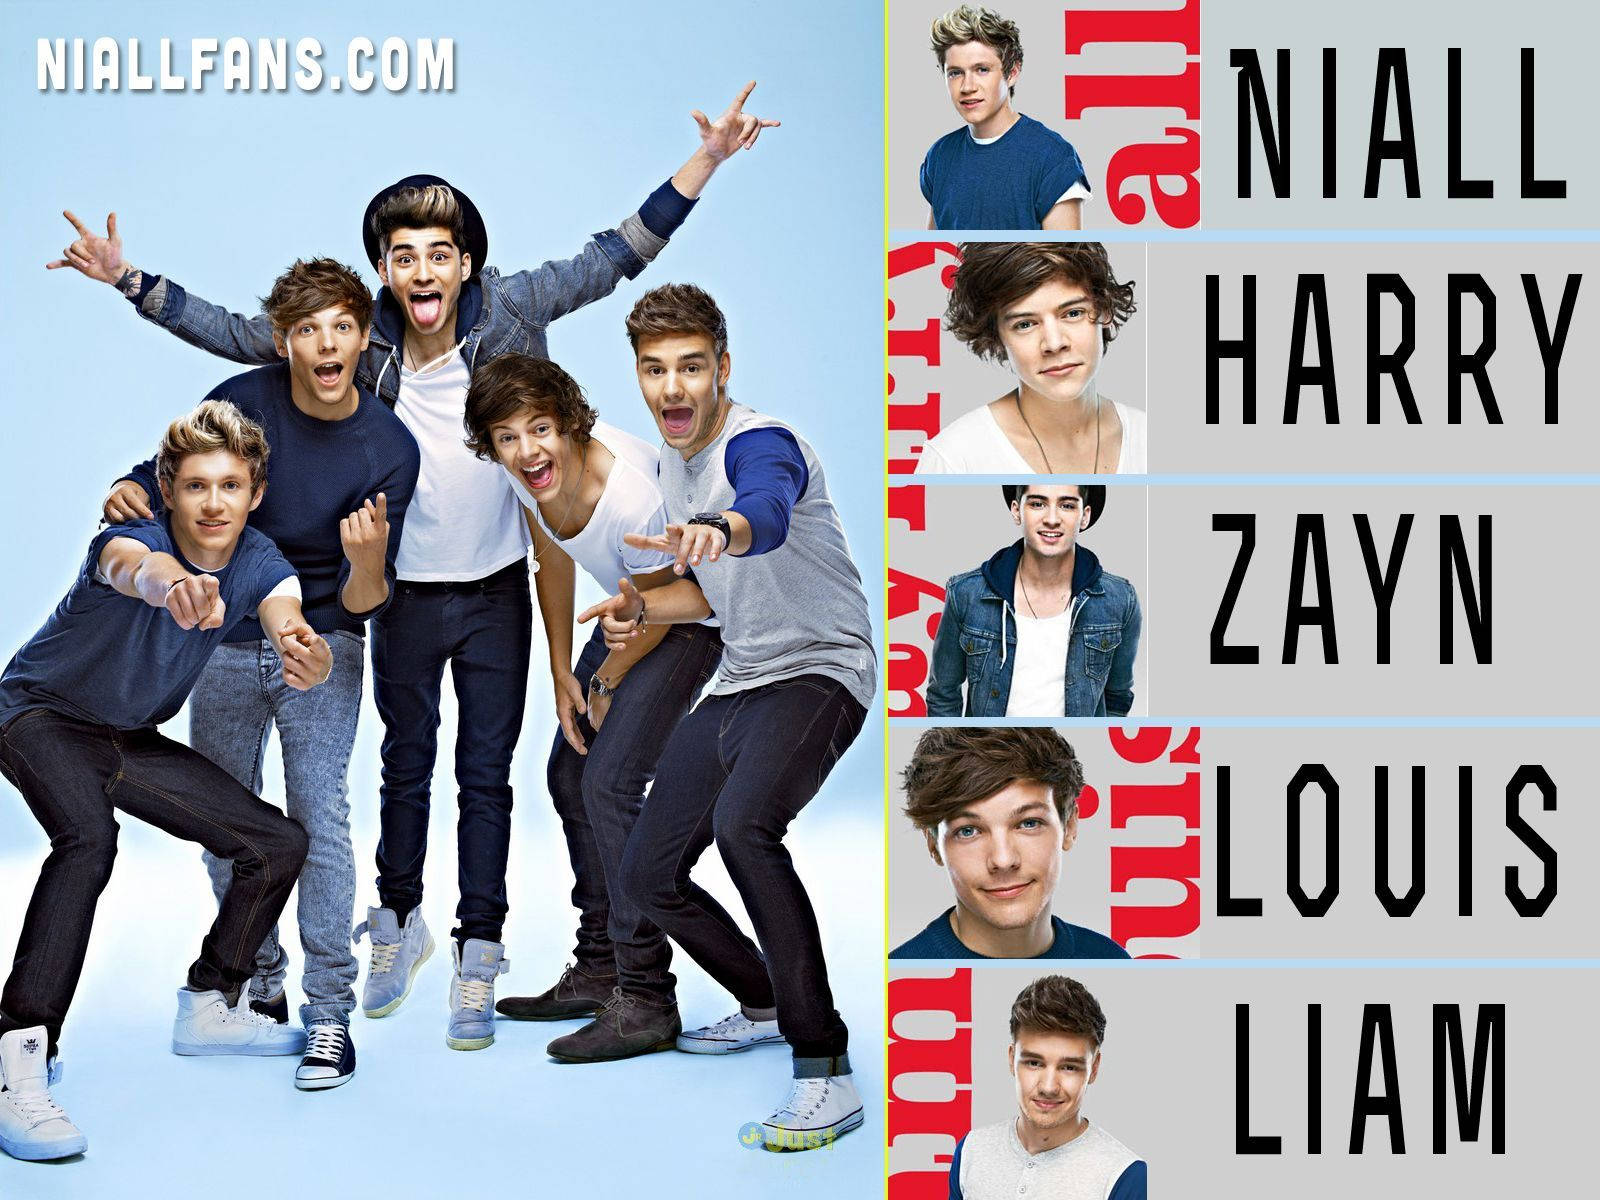 All-star 5: One Direction’s Harry, Zayn, Louis, Niall And Liam